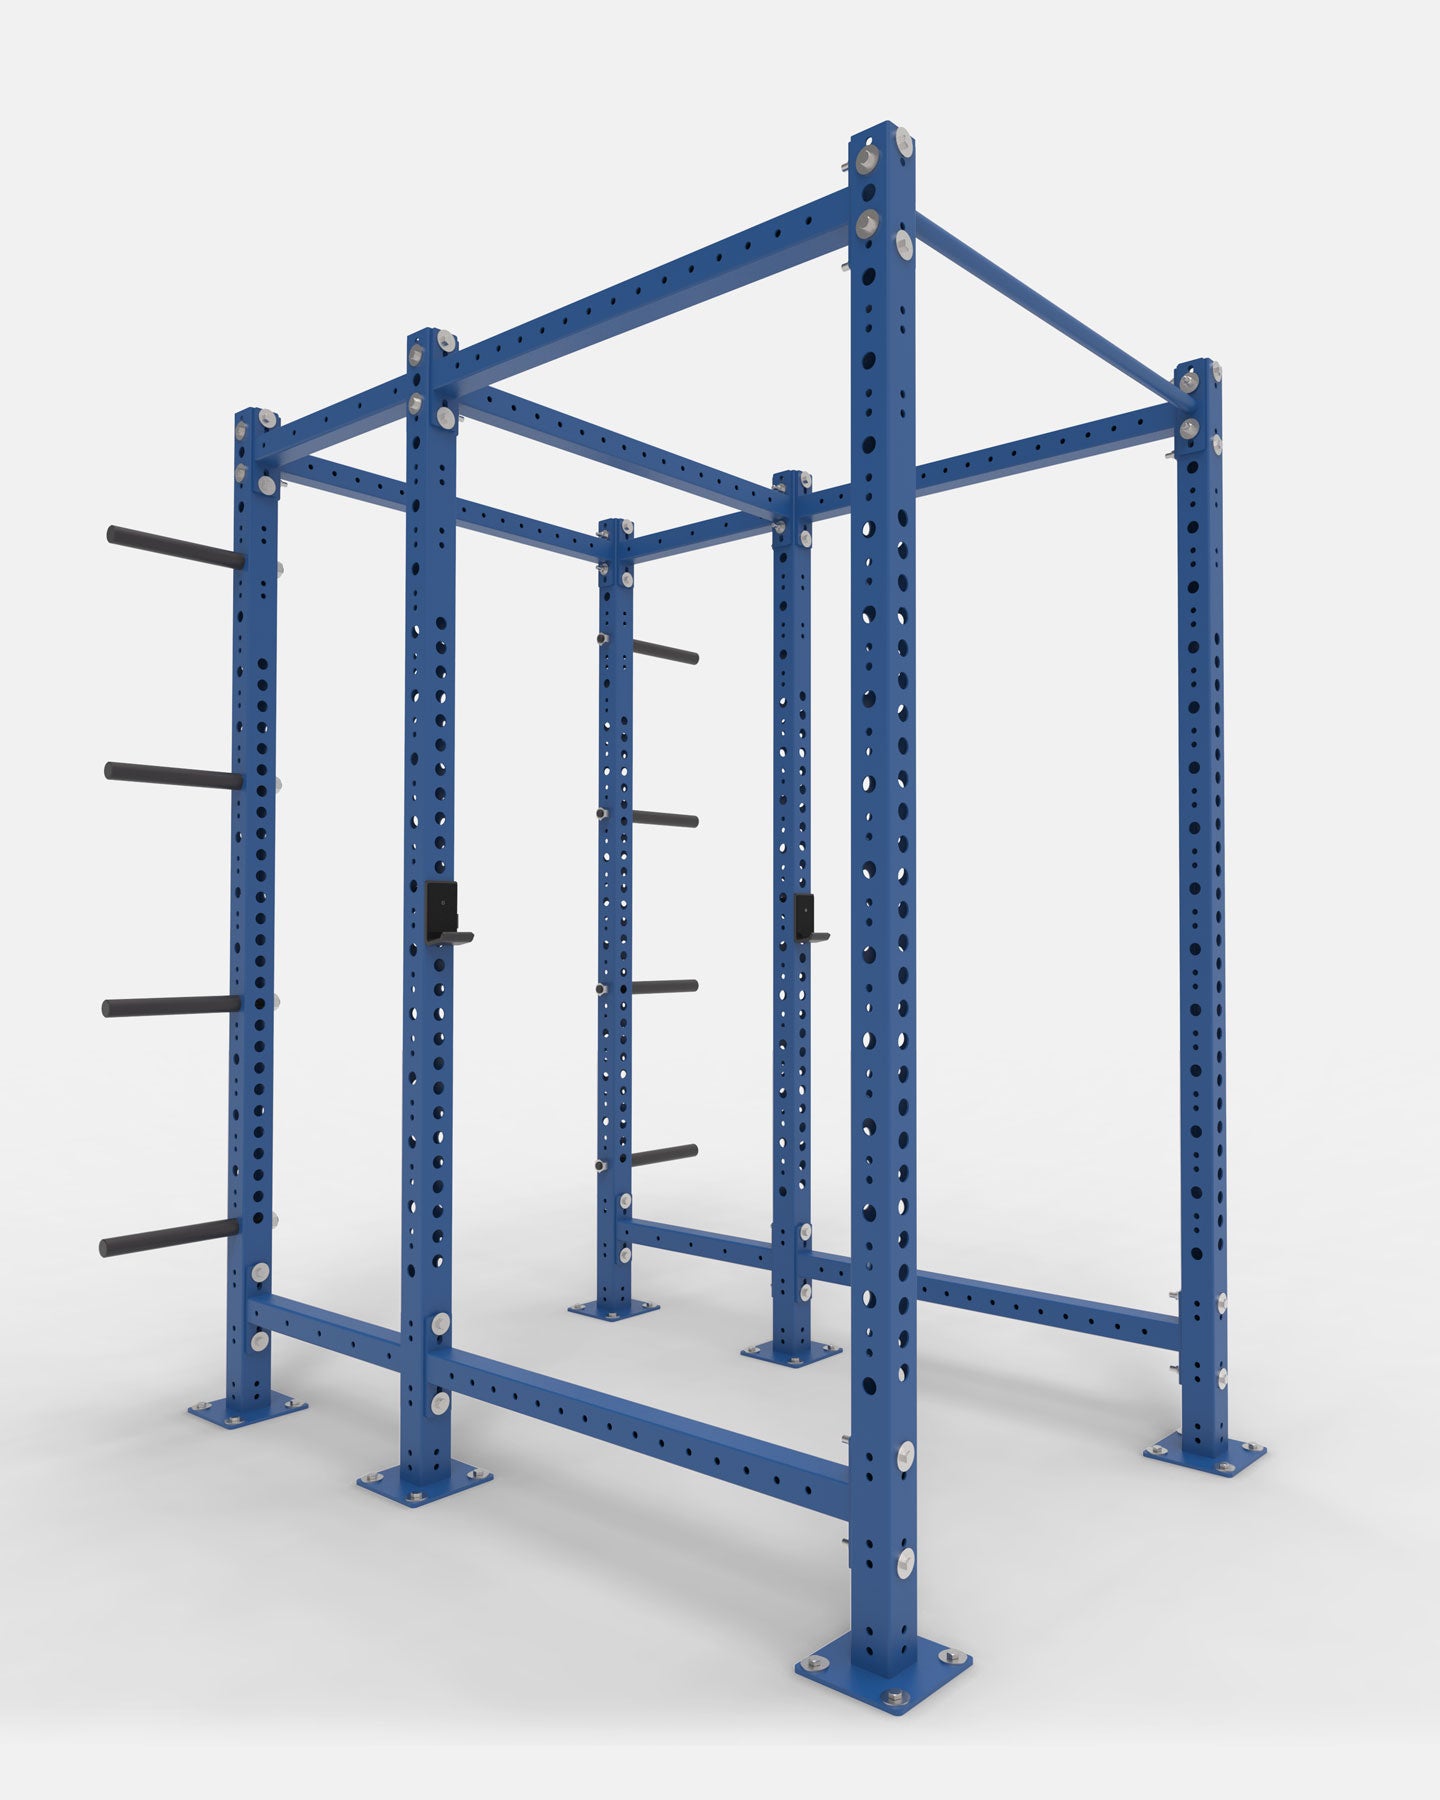 4x4 color power rack for home gym